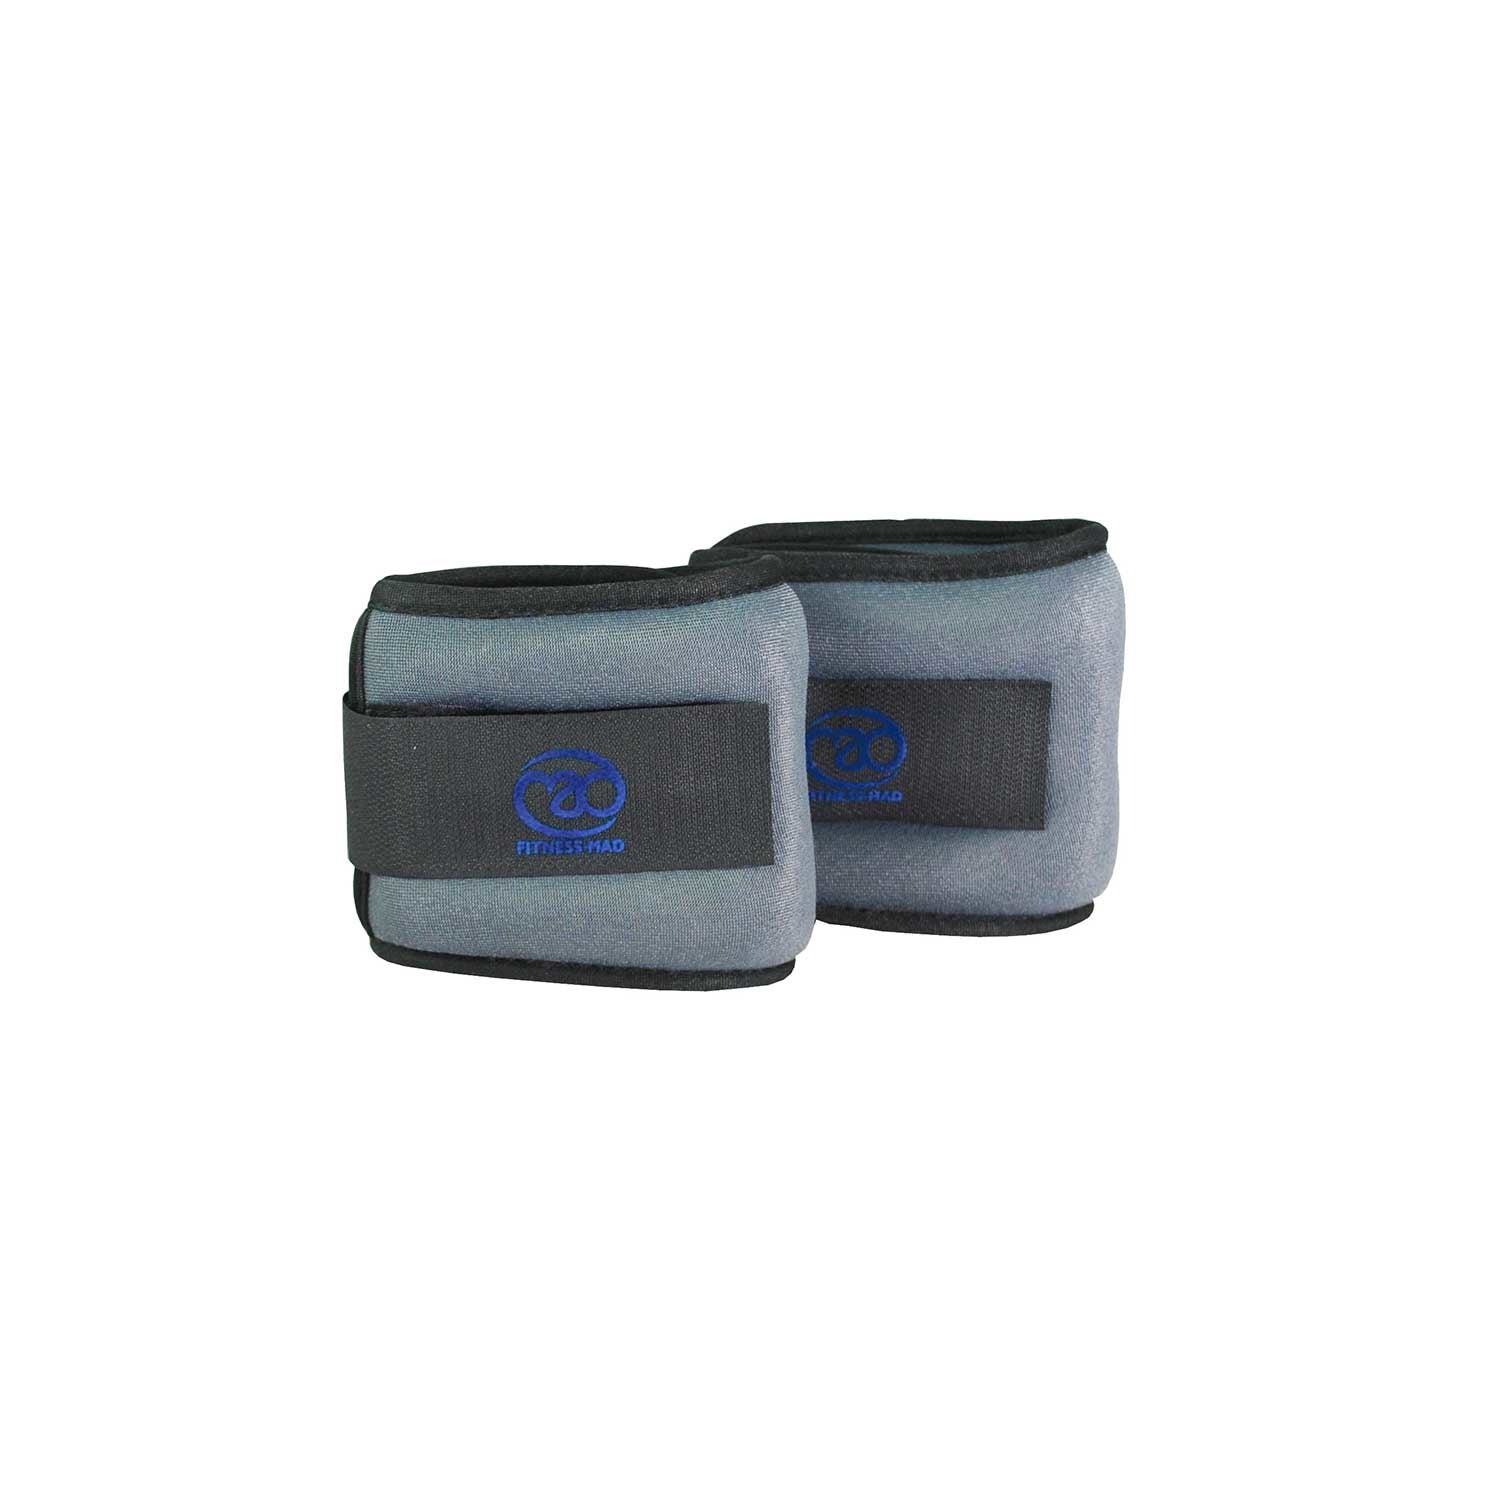 Wrist & Ankle Weights - 2 x 1kg